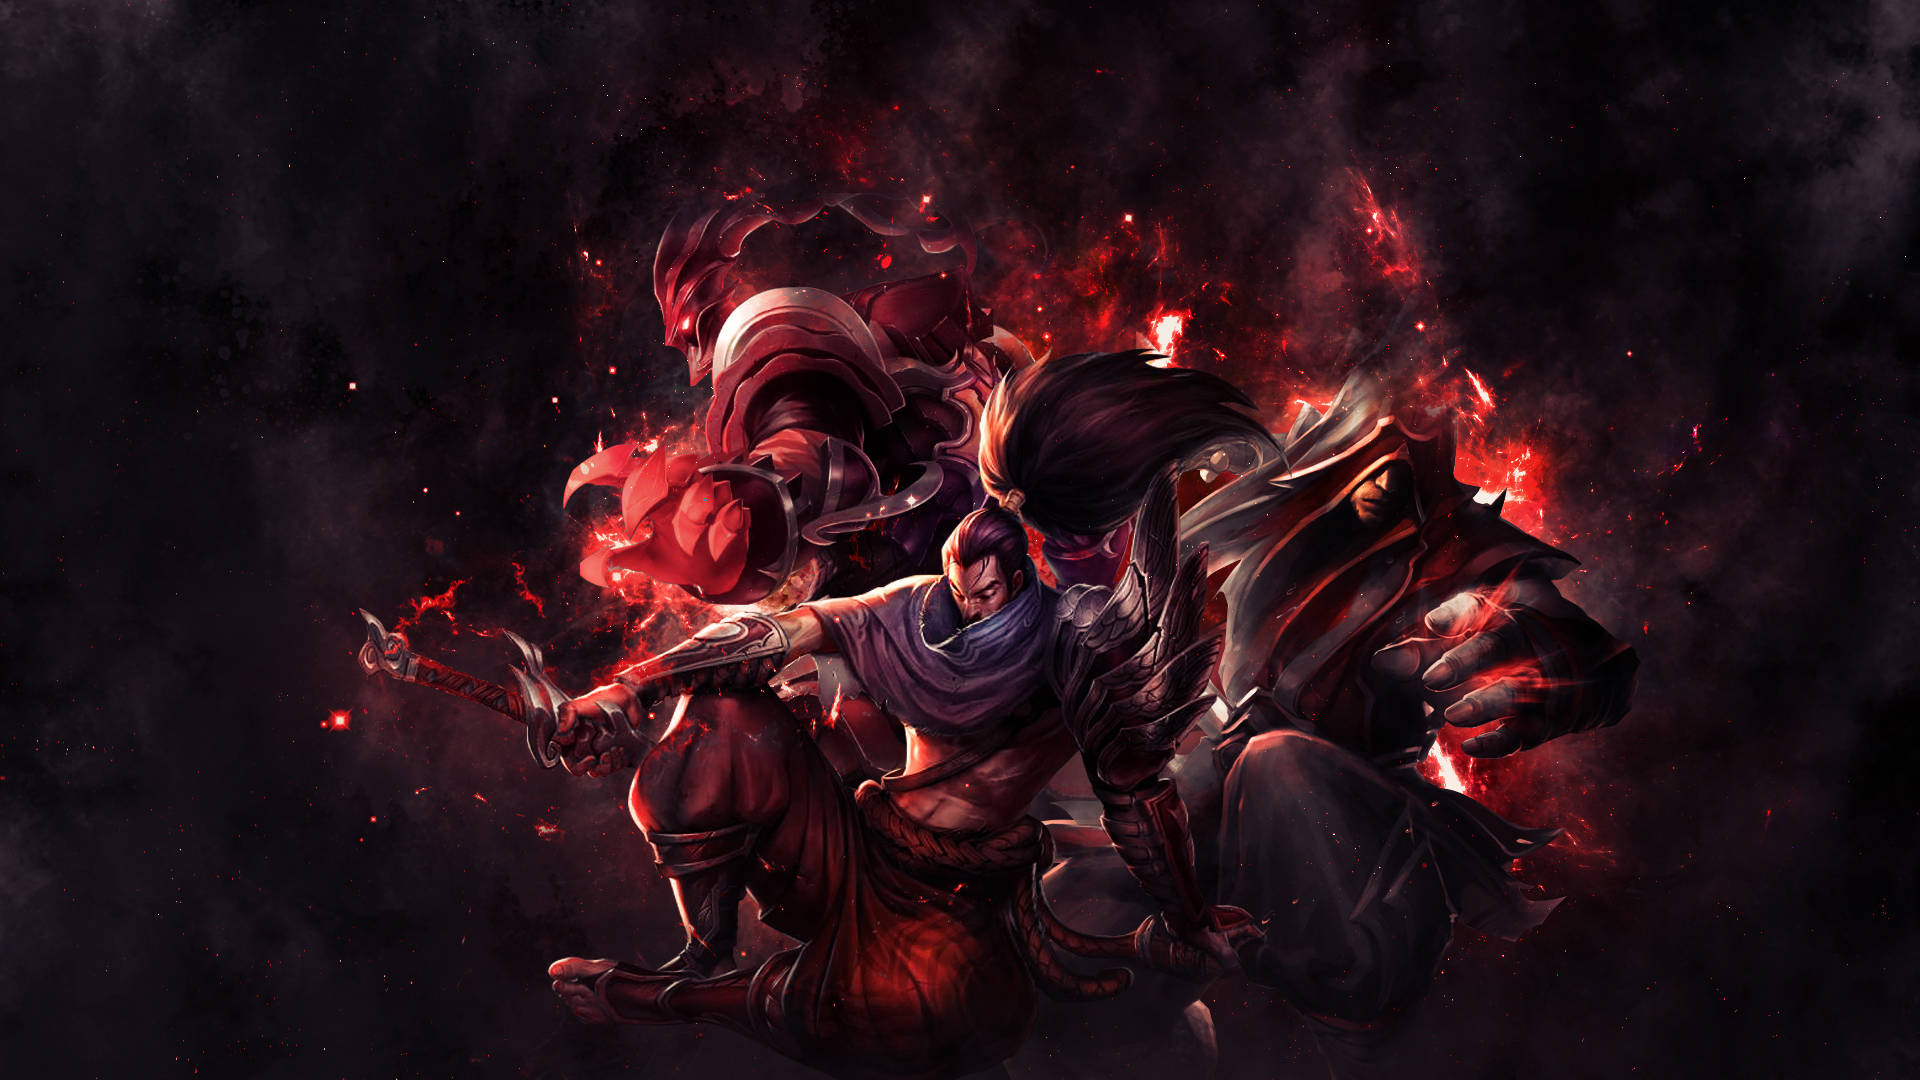 Cool League Of Legends Champ Yasuo Background